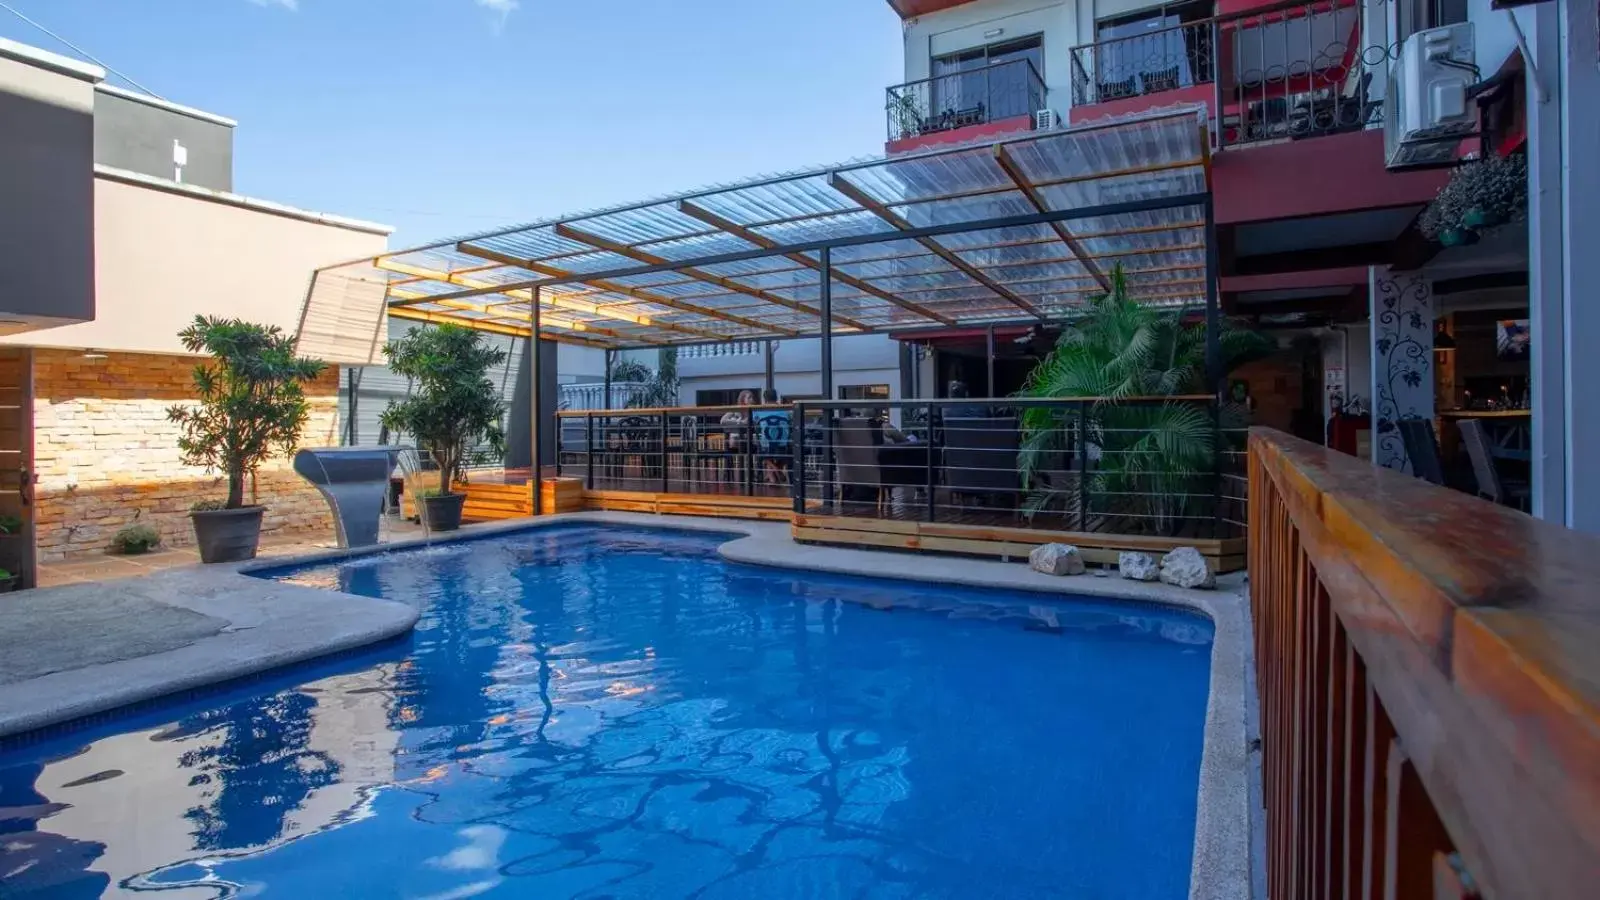 Property building, Swimming Pool in La Fortuna Downtown Hotel Boutique